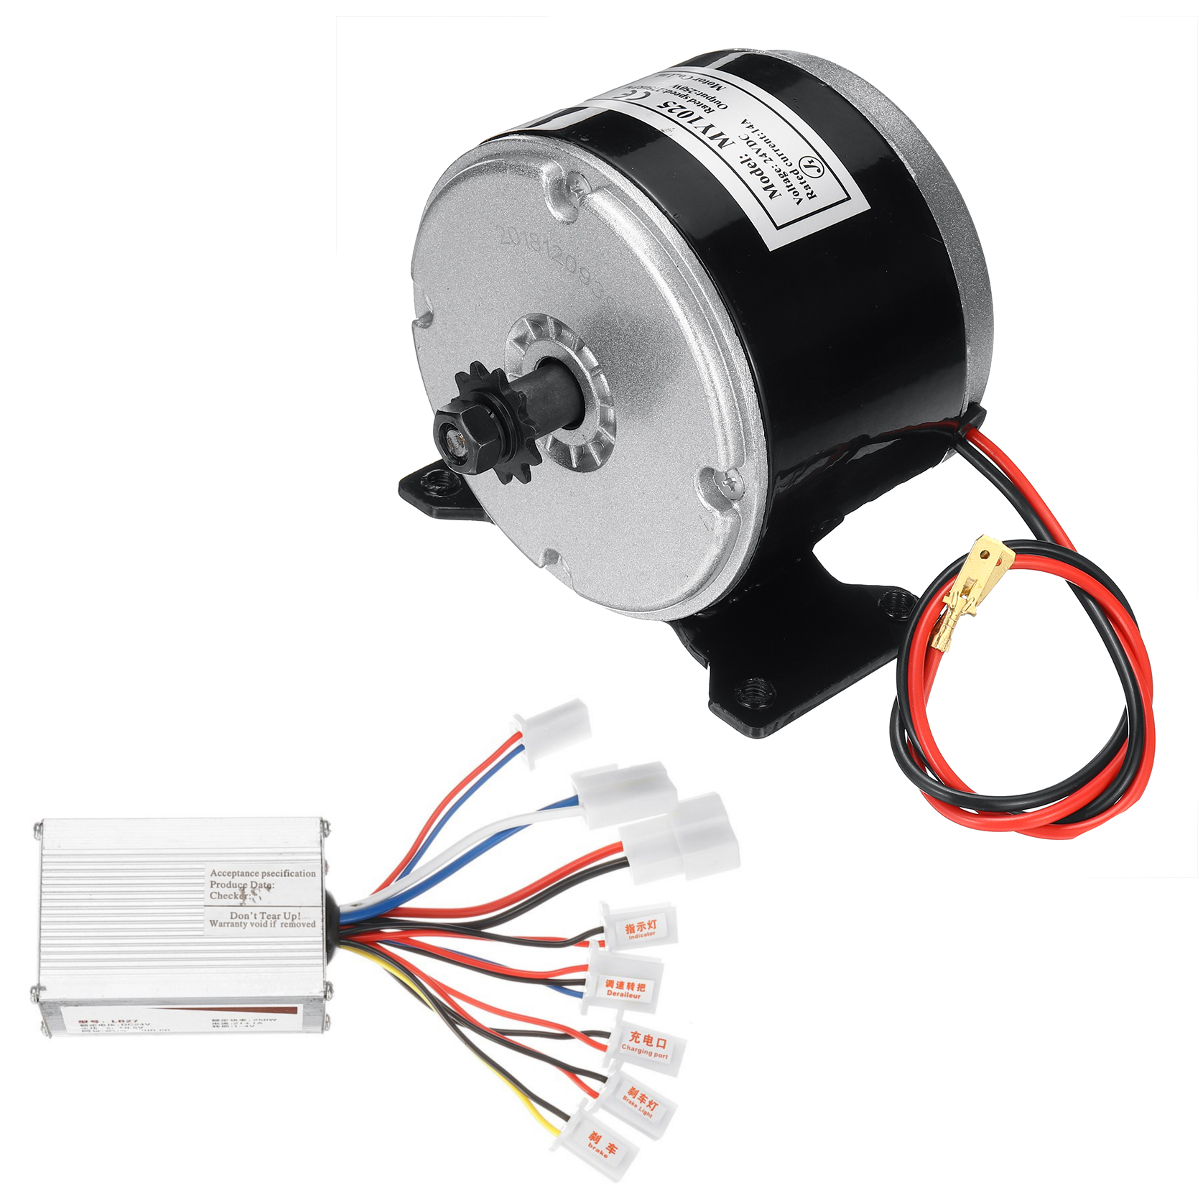 24V 250W Brushed Motor with Controller for 25H Chain Electric Bicycle Scooter E-Bike - Auto GoShop